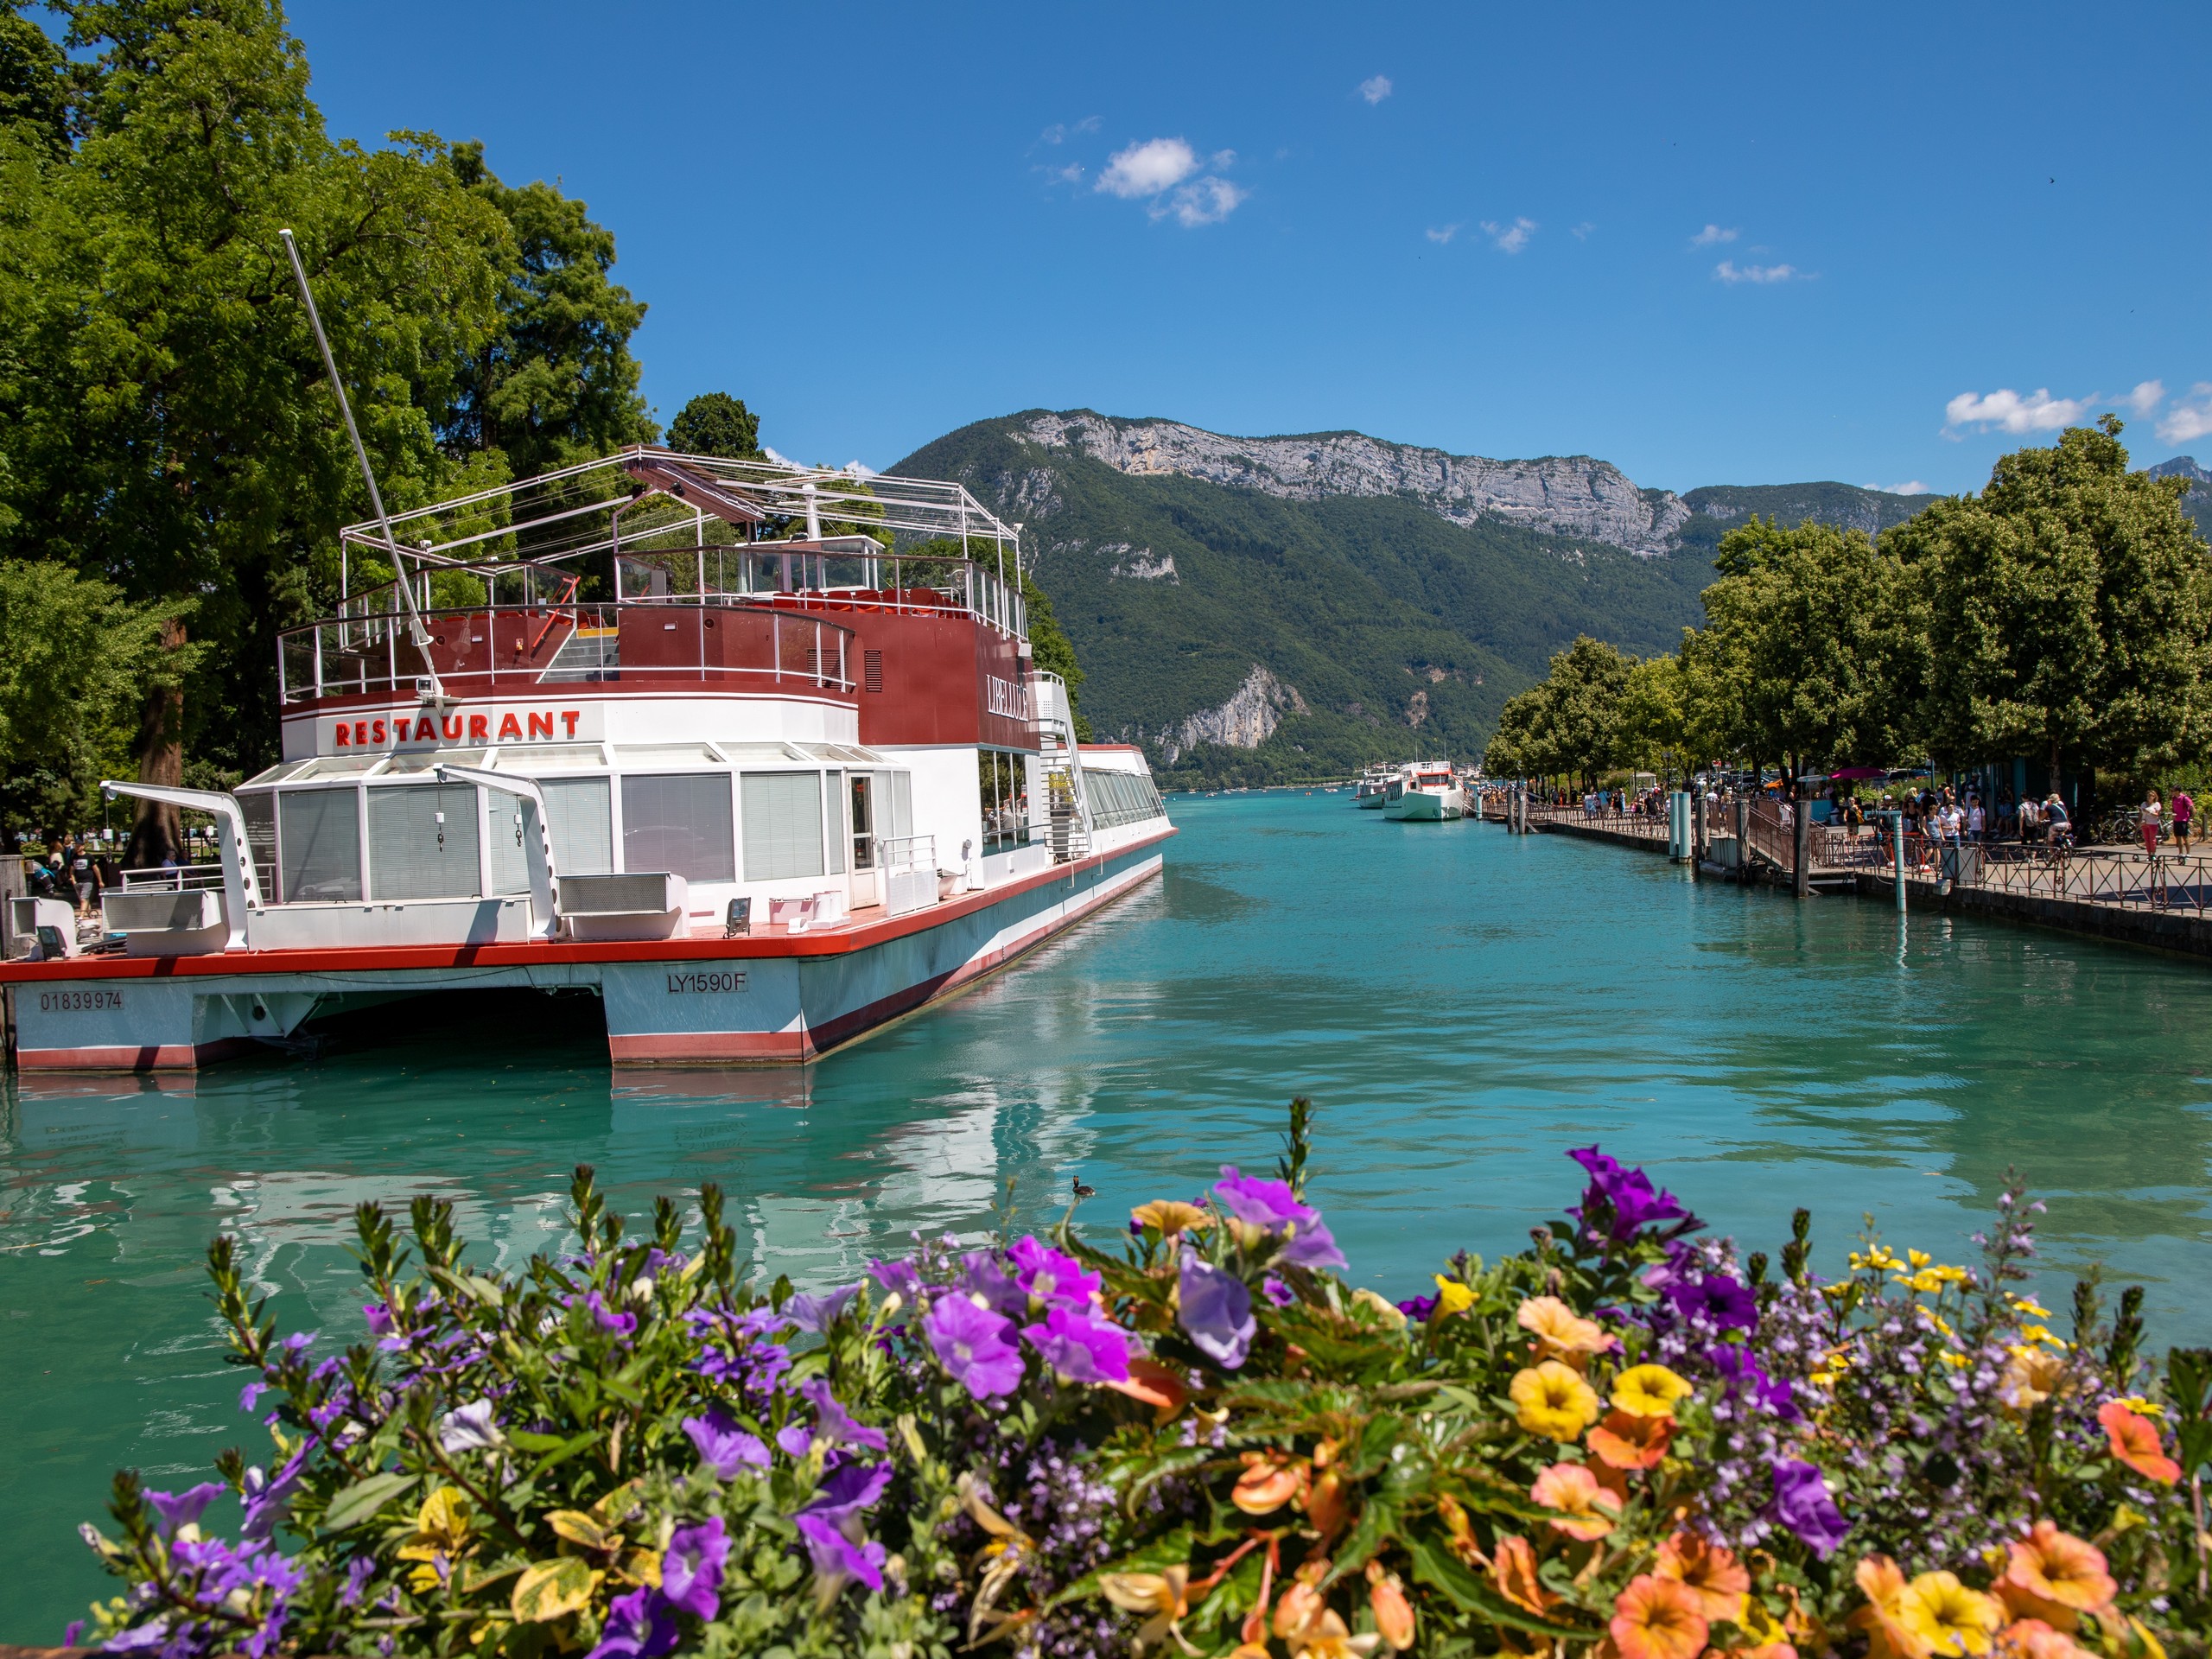 Boat on the Annecy Lake in France